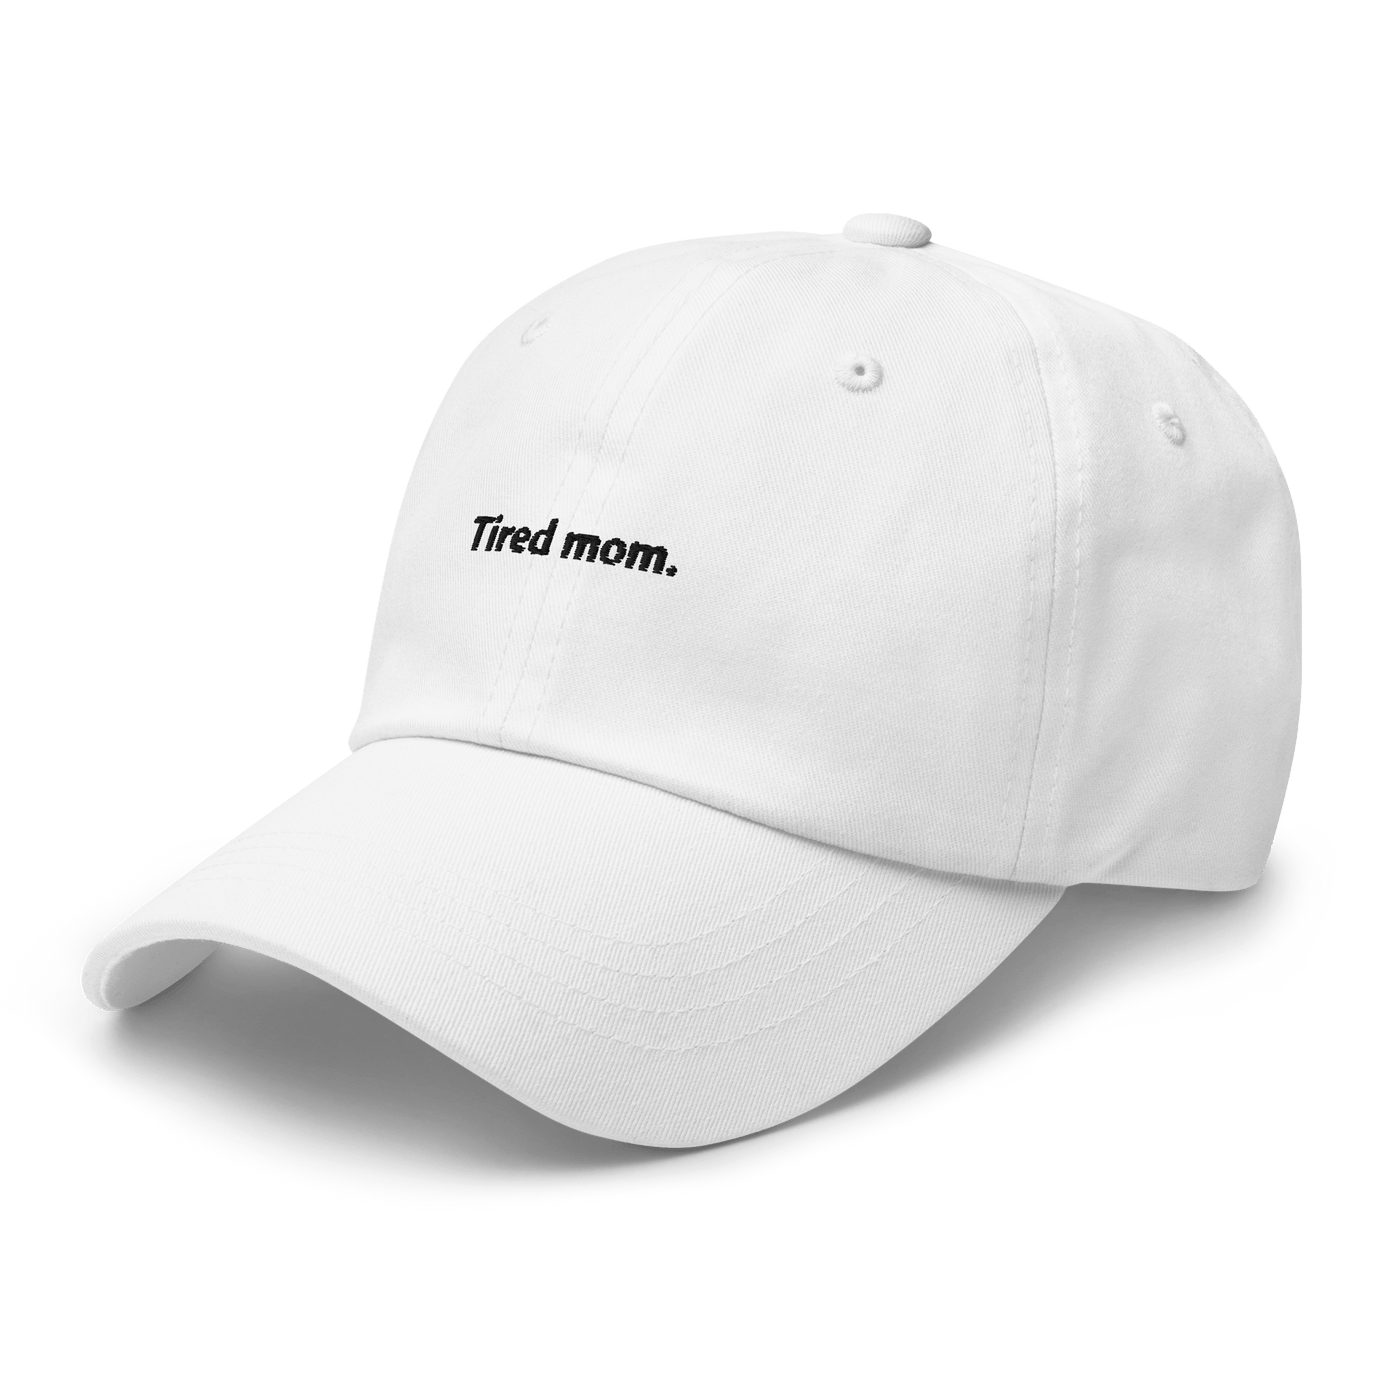 Tired mom Dad hat - White - - Just Another Cap Store